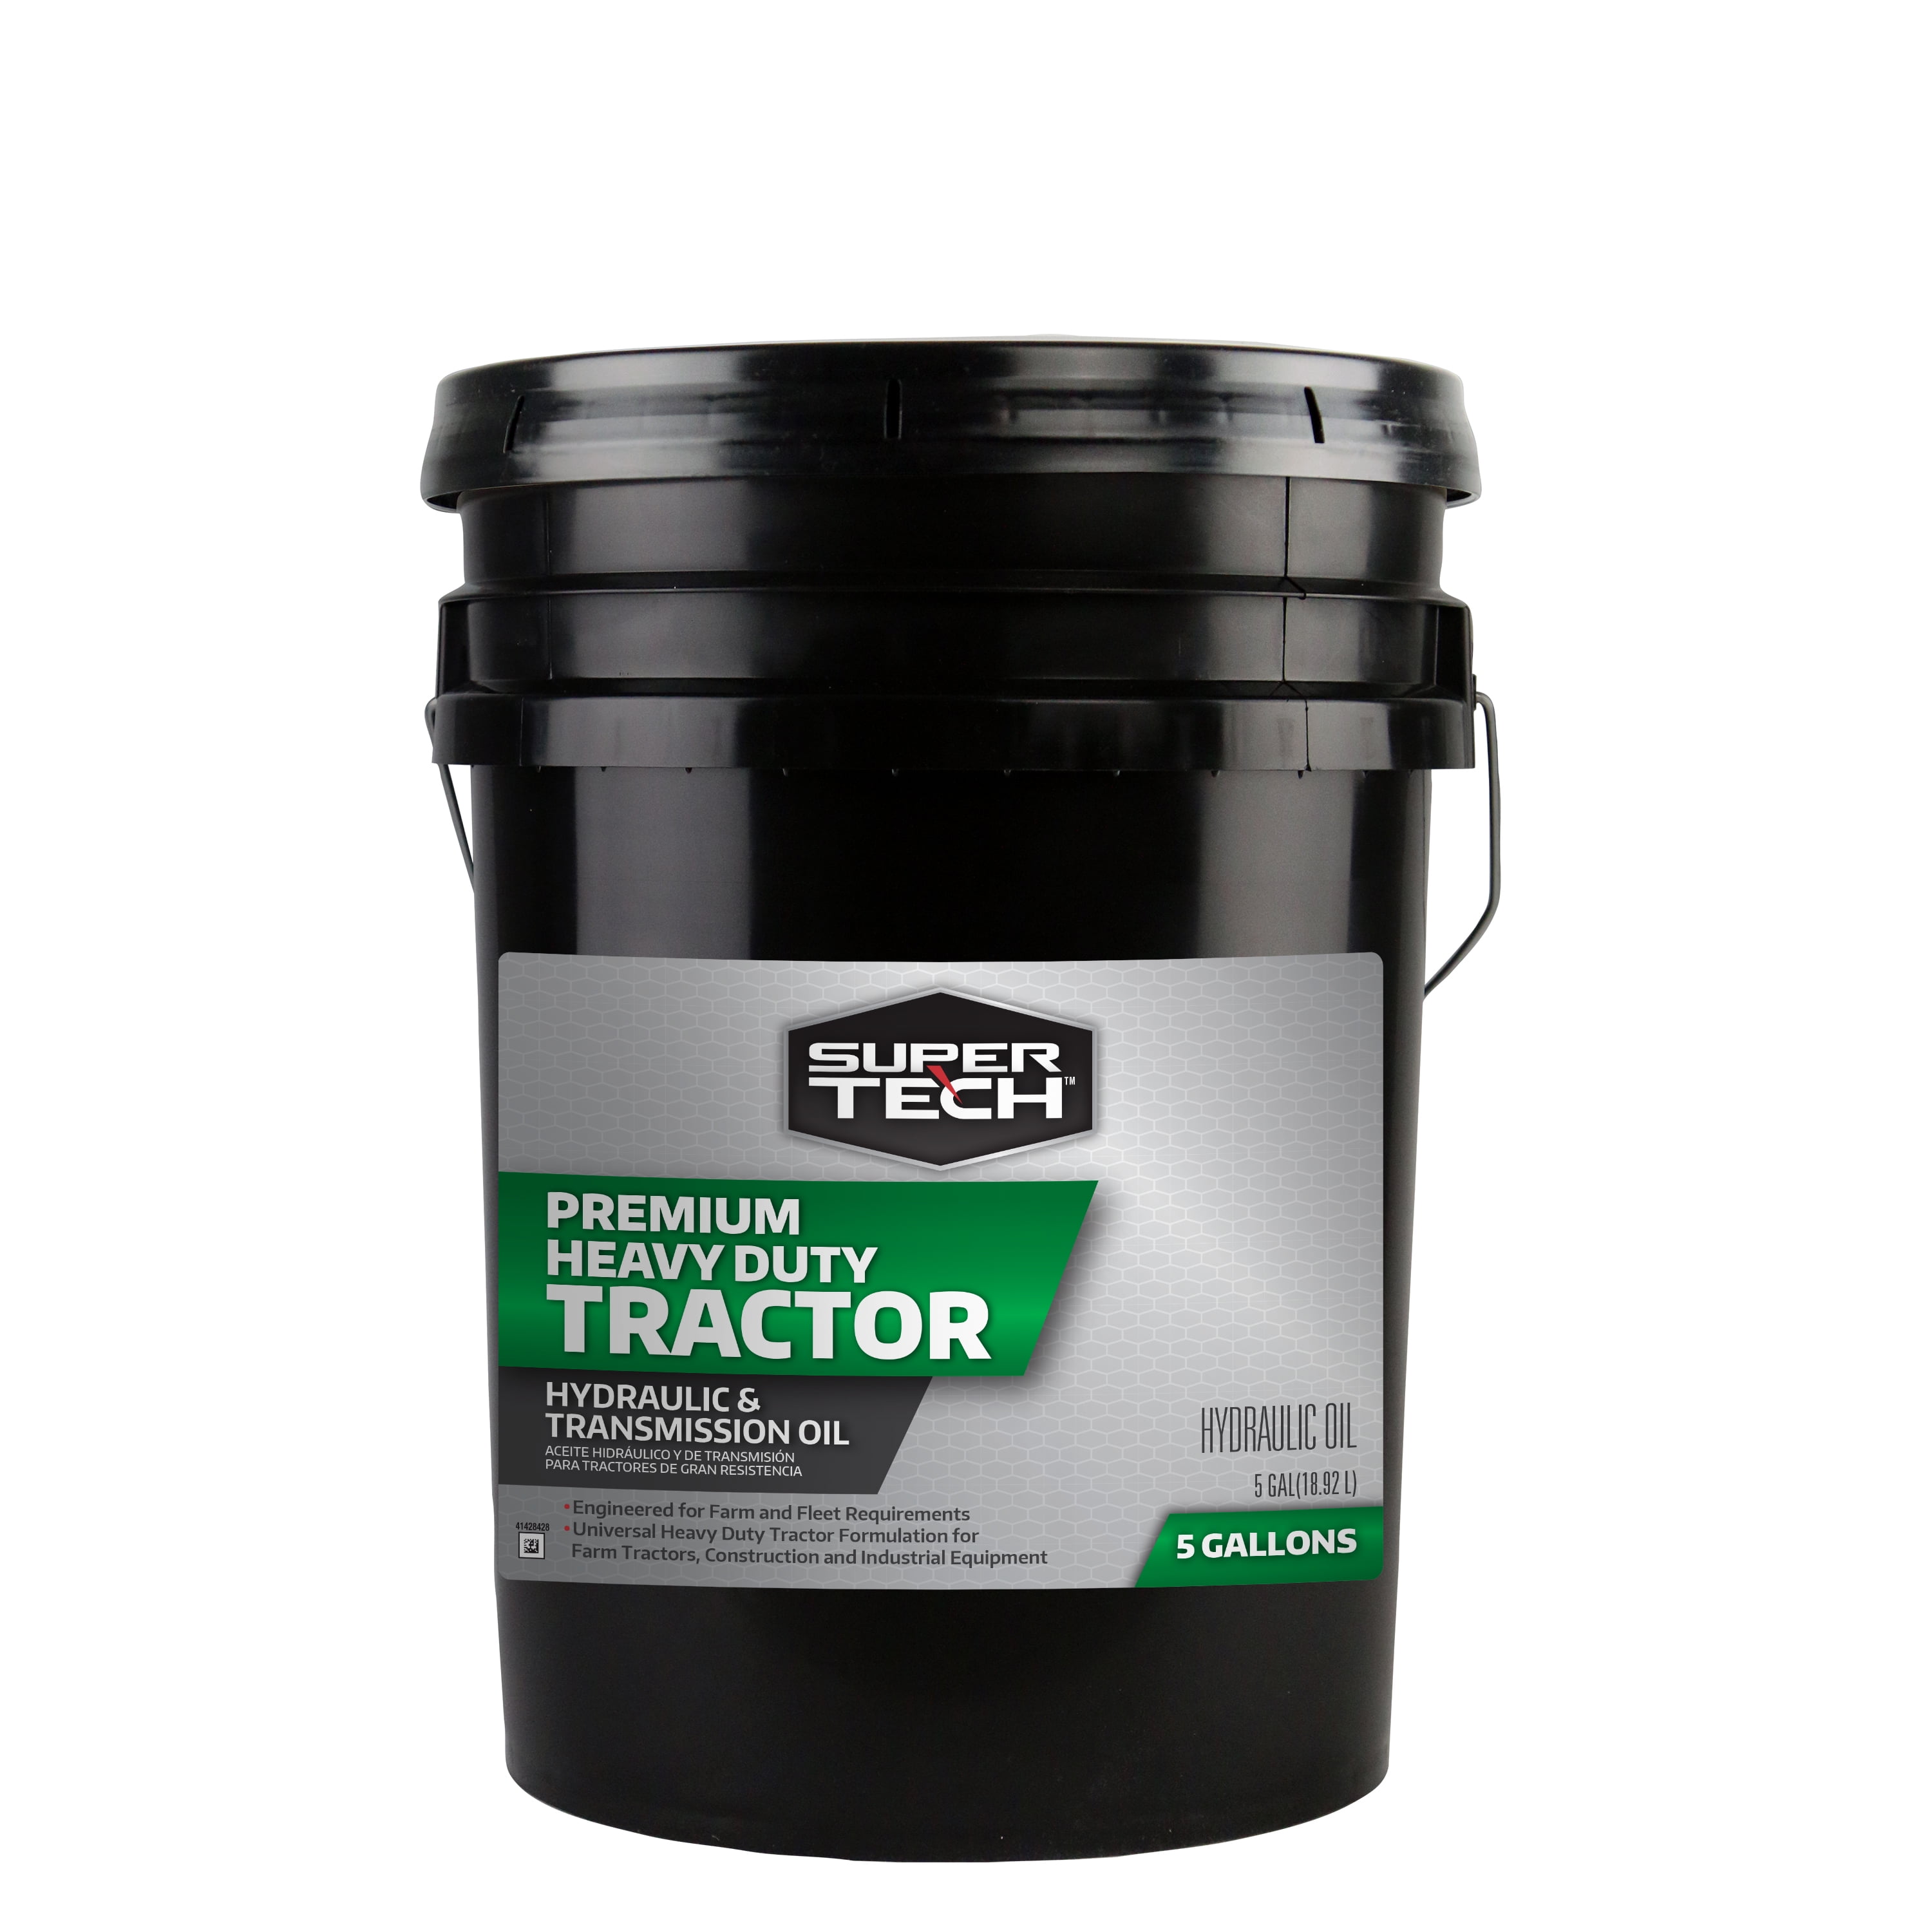 Super Tech Heavy Duty Tractor Hydraulic and Transmission Fluid, 5 Gallons